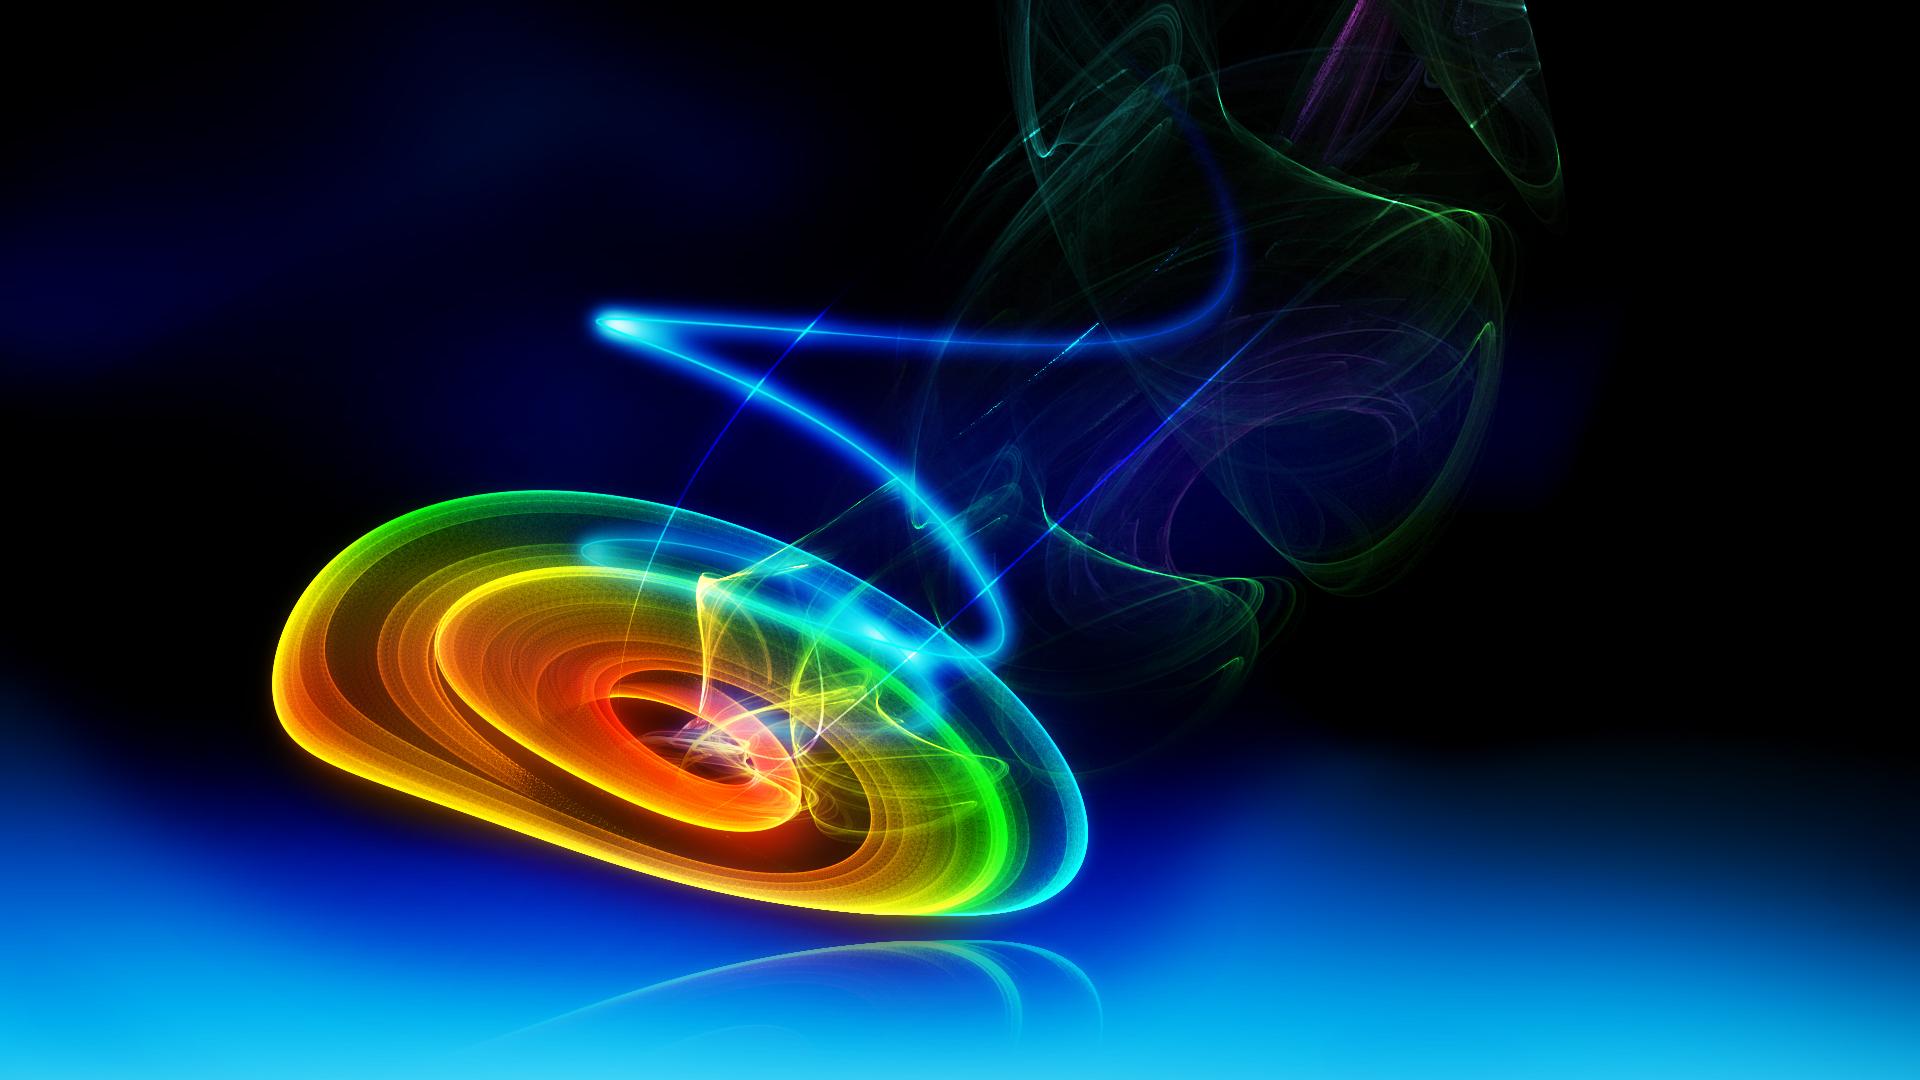 Colors Wallpaper High Quality And Resolution